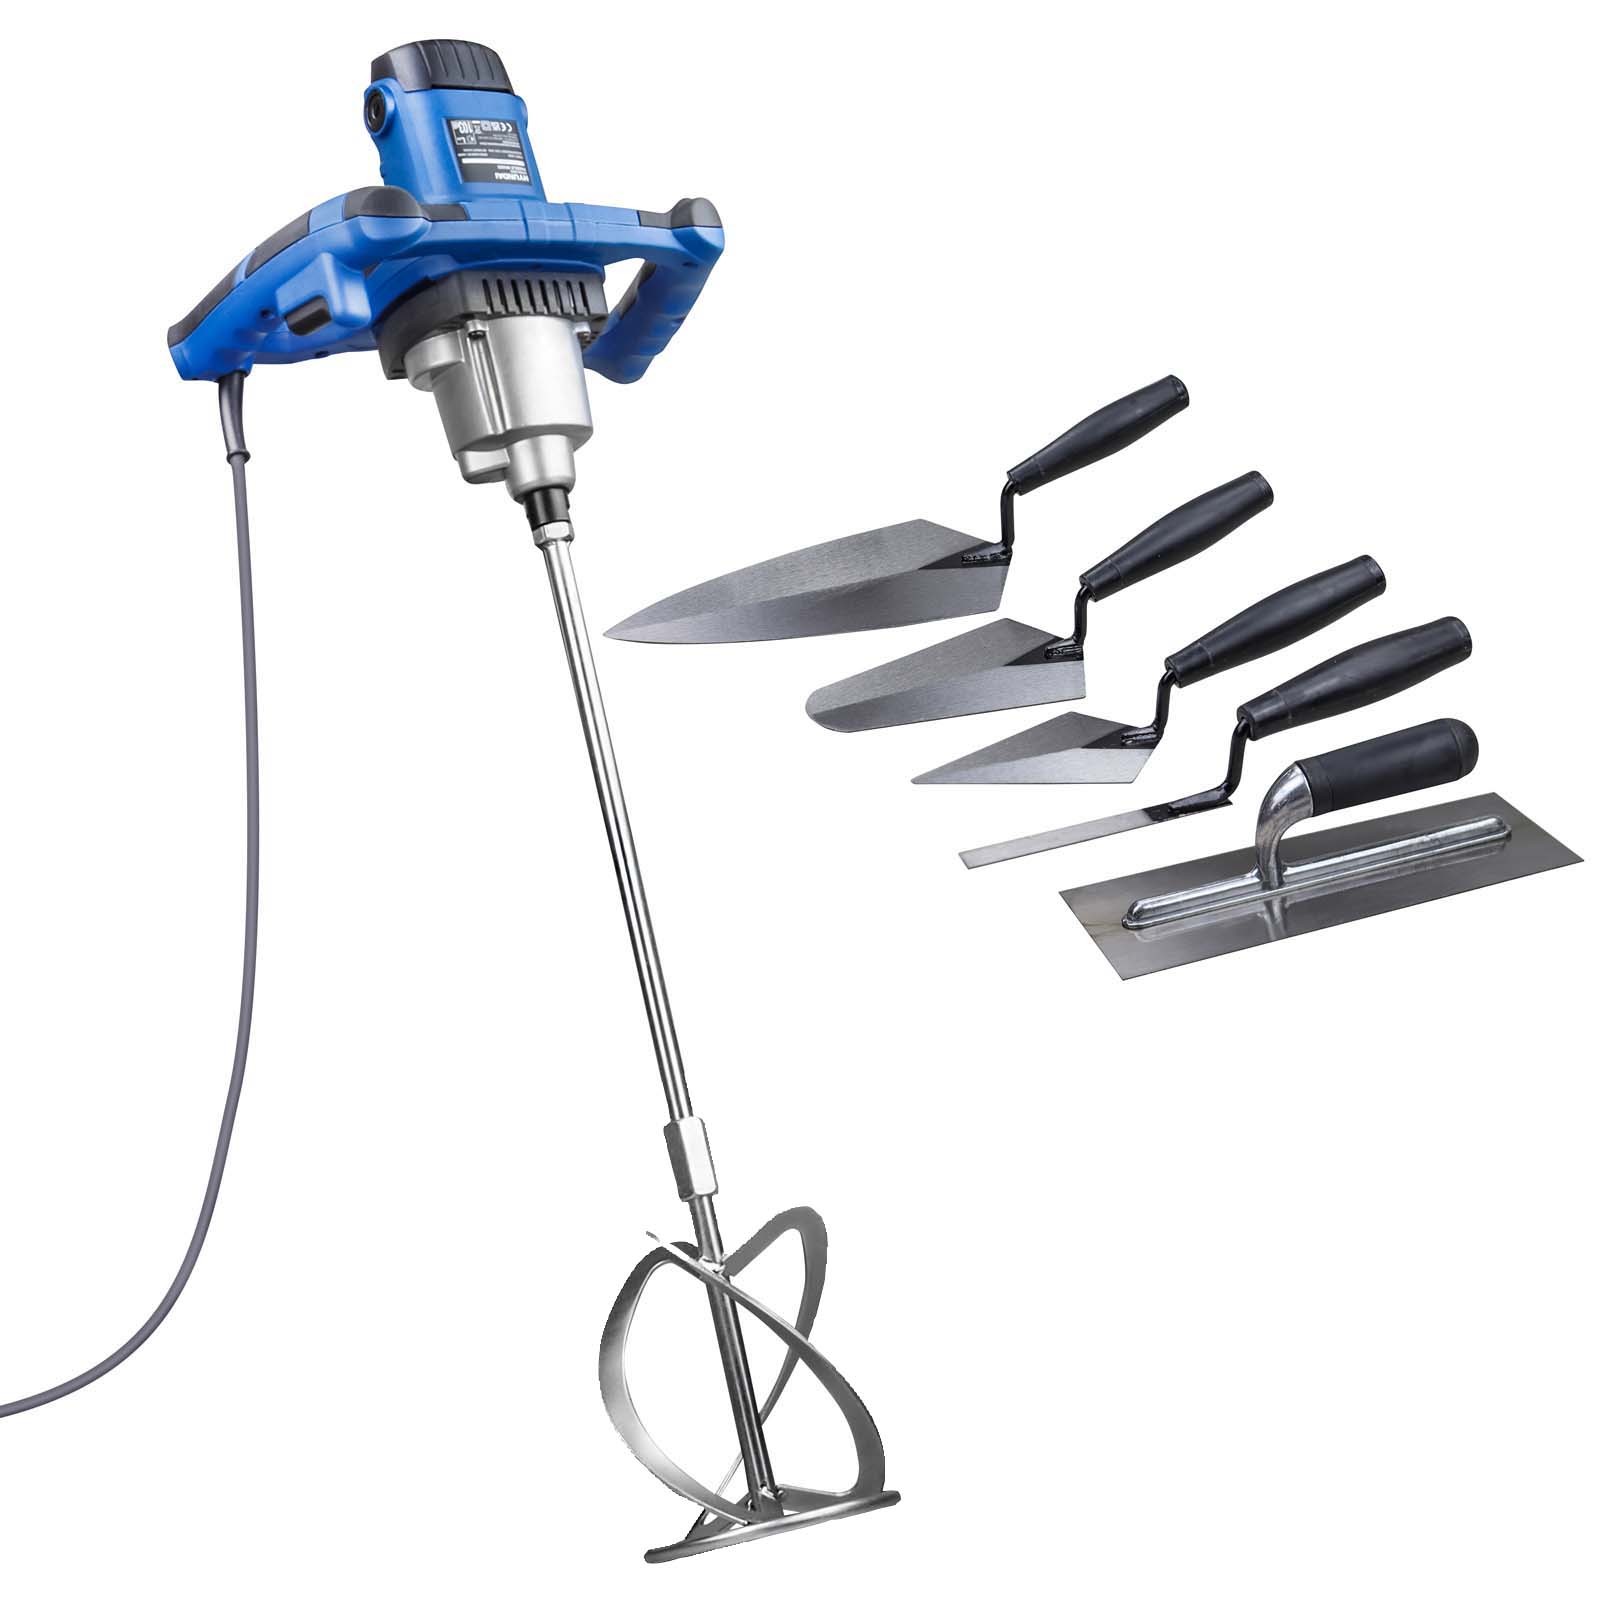 Image of Hyundai HYPM1600E Corded Paddle Mixer with Trowel Set - 1600W